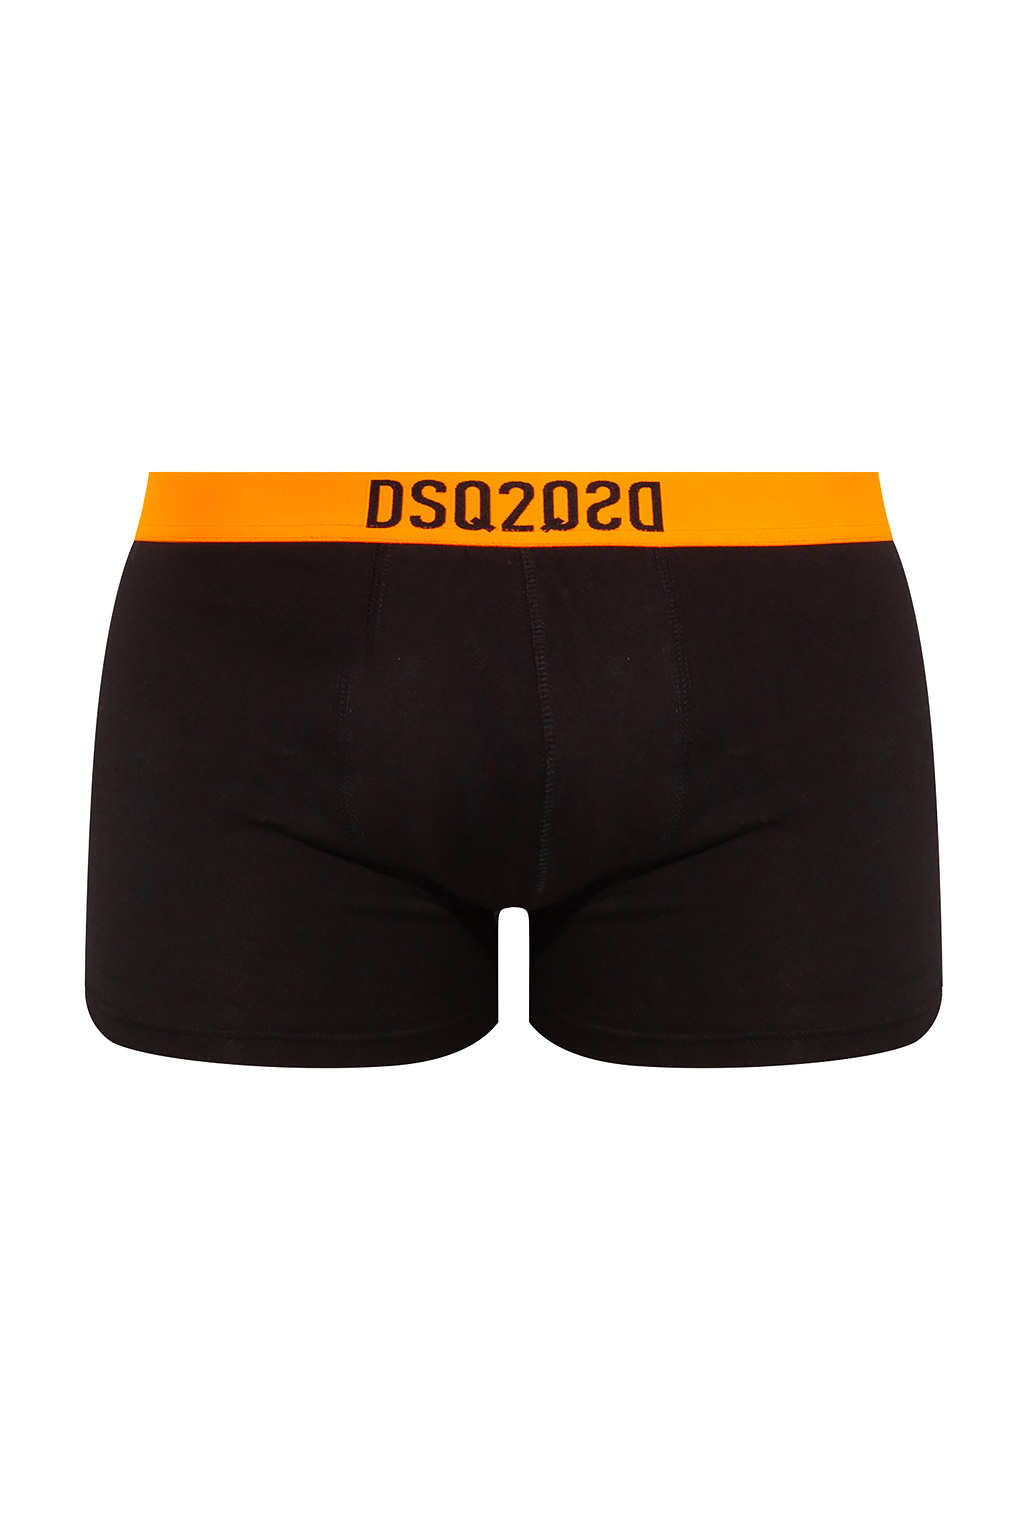 Dsquared2 GIRLS CLOTHES 4-14 YEARS